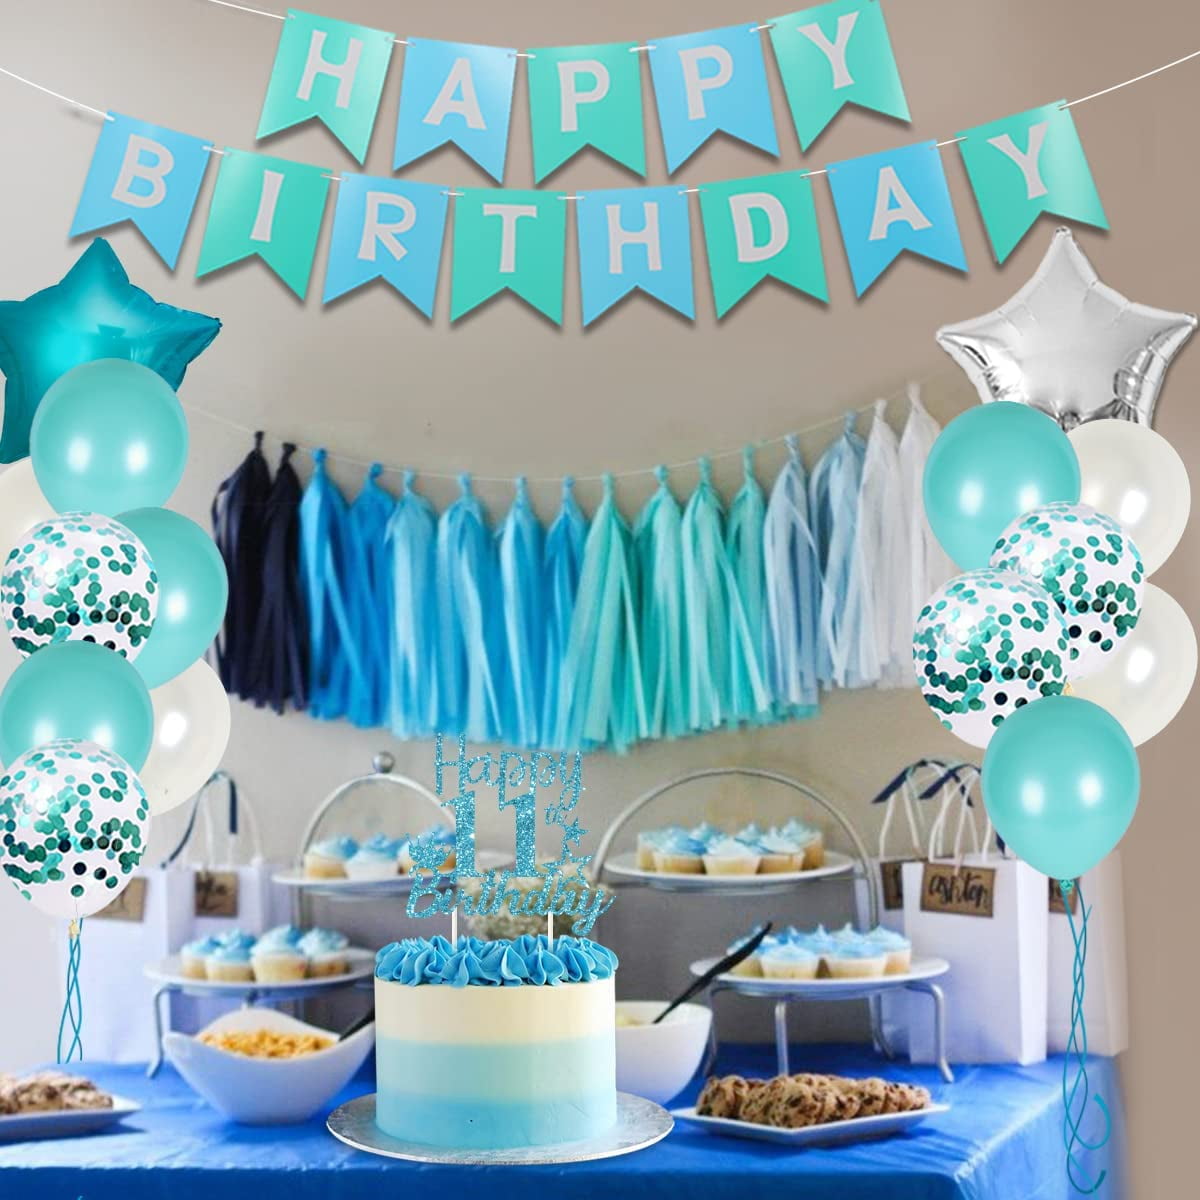 11th Birthday Decorations for Girls Teal - Happy 11th Birthday Decorations Eleventh Birthday Cake Topper Teal Fringe Curtain Turquoise Banner Number 11 Foil Balloon, 11 Year Old Girl Gift Ideas - Walmart.com